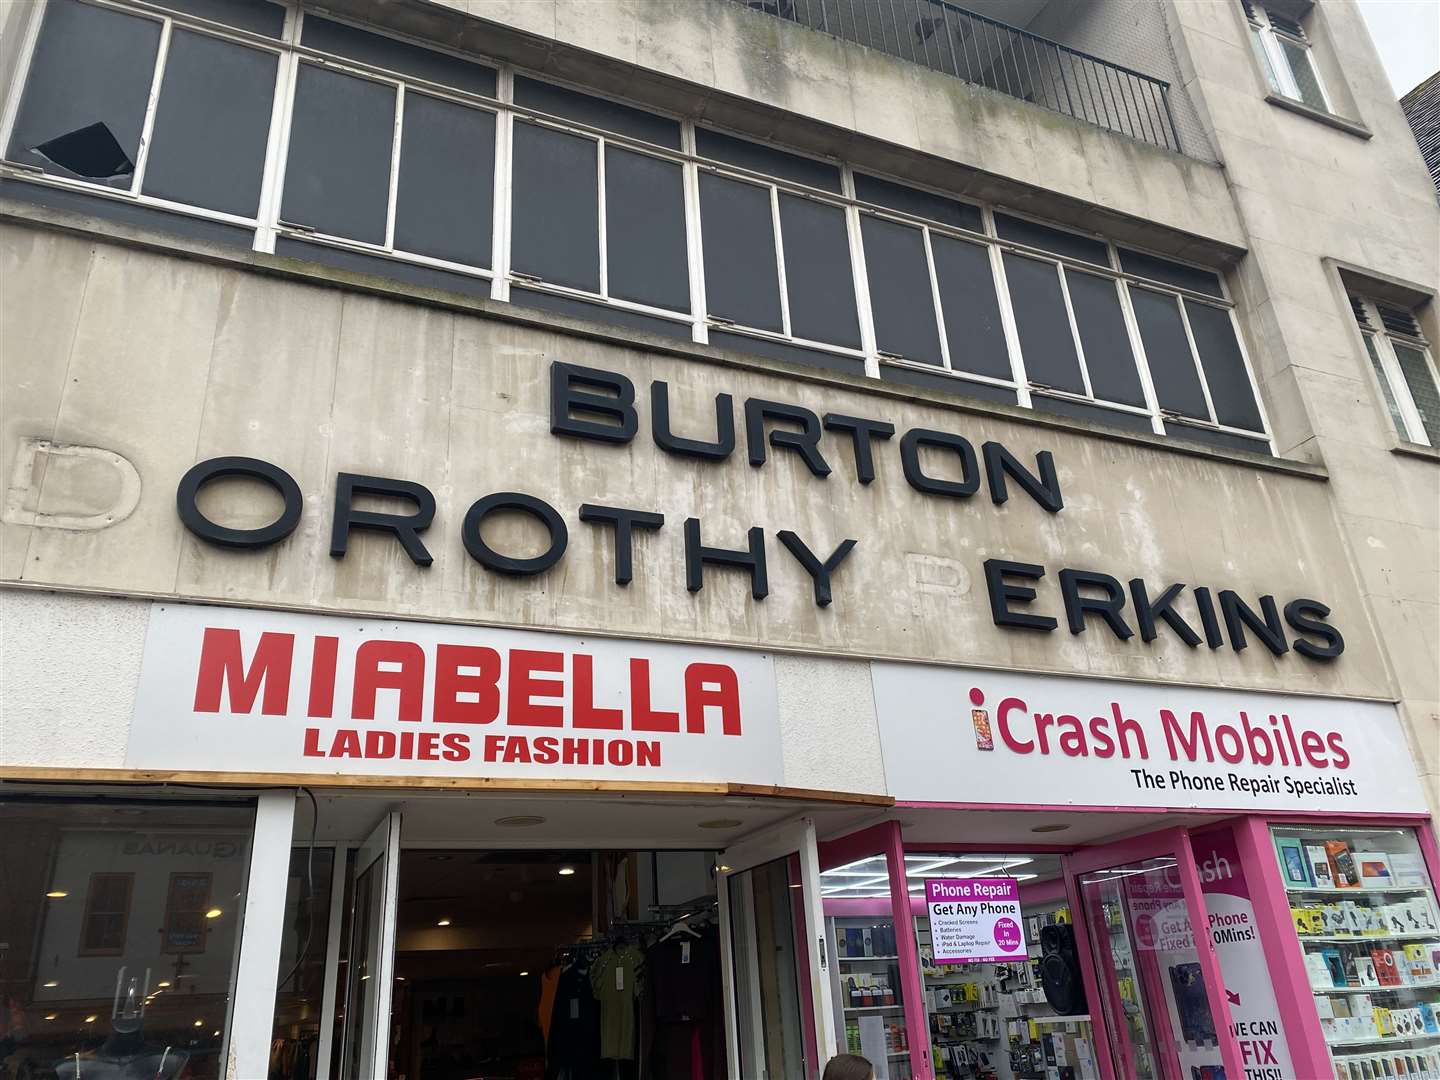 It was announced in February 2021 that the presence of Burton and Dorothy Perkins on the high street would cease to exist after Boohoo bought the brands for more than £25 million